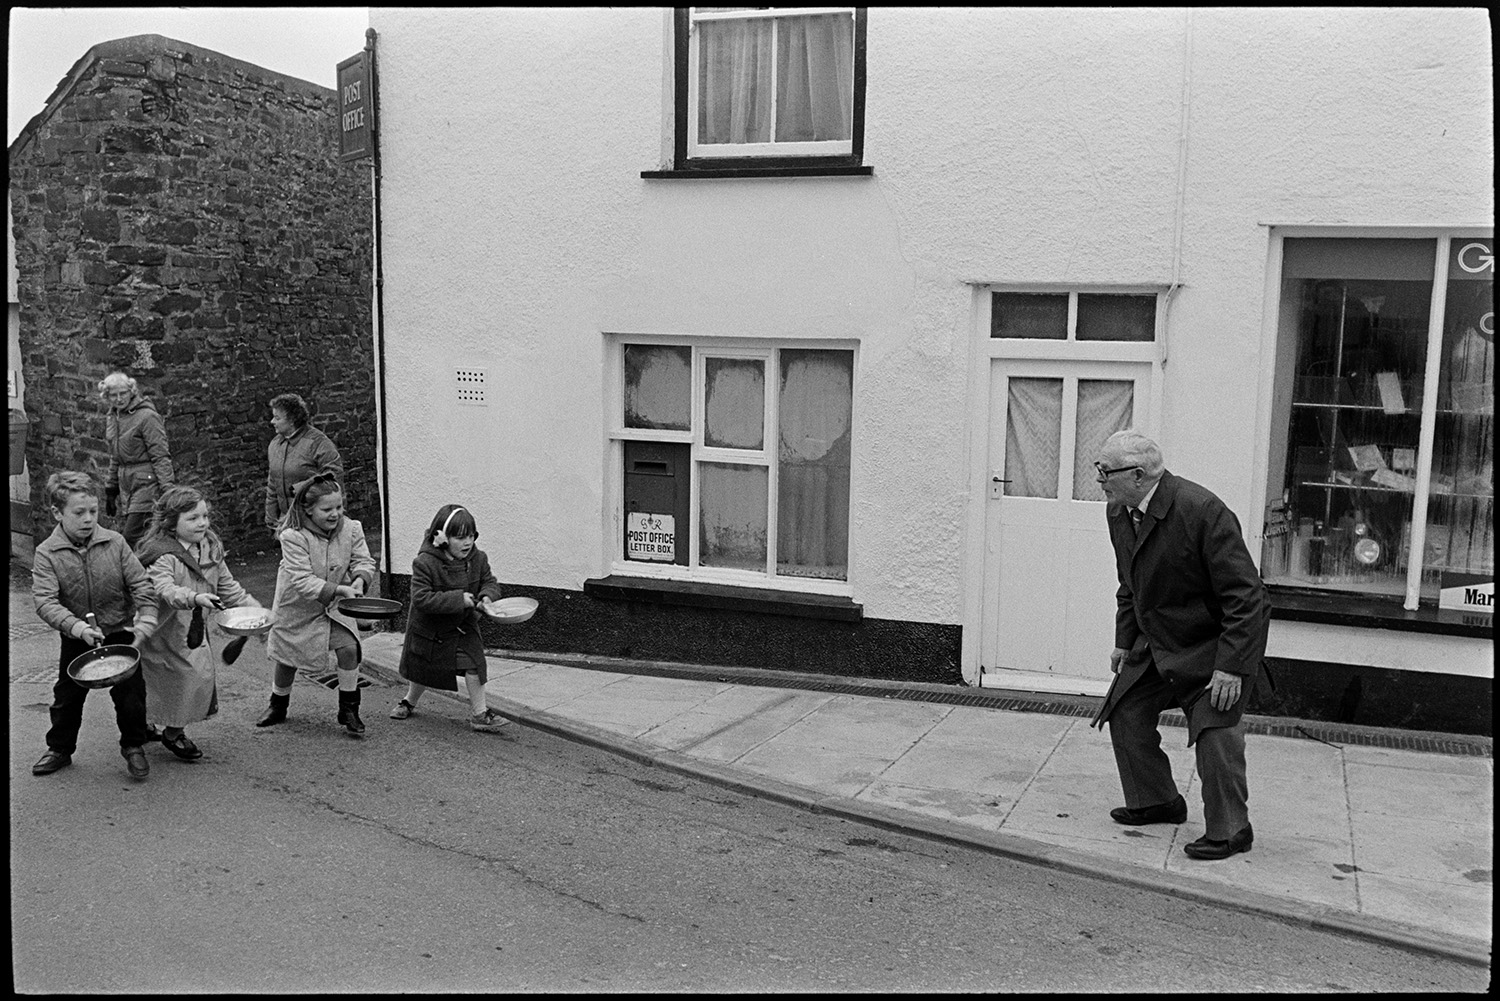 Shrove Tuesday Pancake Race in village street, children's races.
[Four children holding frying pans containing pancakes in a Shrove Tuesday Pancake Race along Fore Street, Dolton. They are being watched and encouraged by a man and two women as they pass the Post Office.]